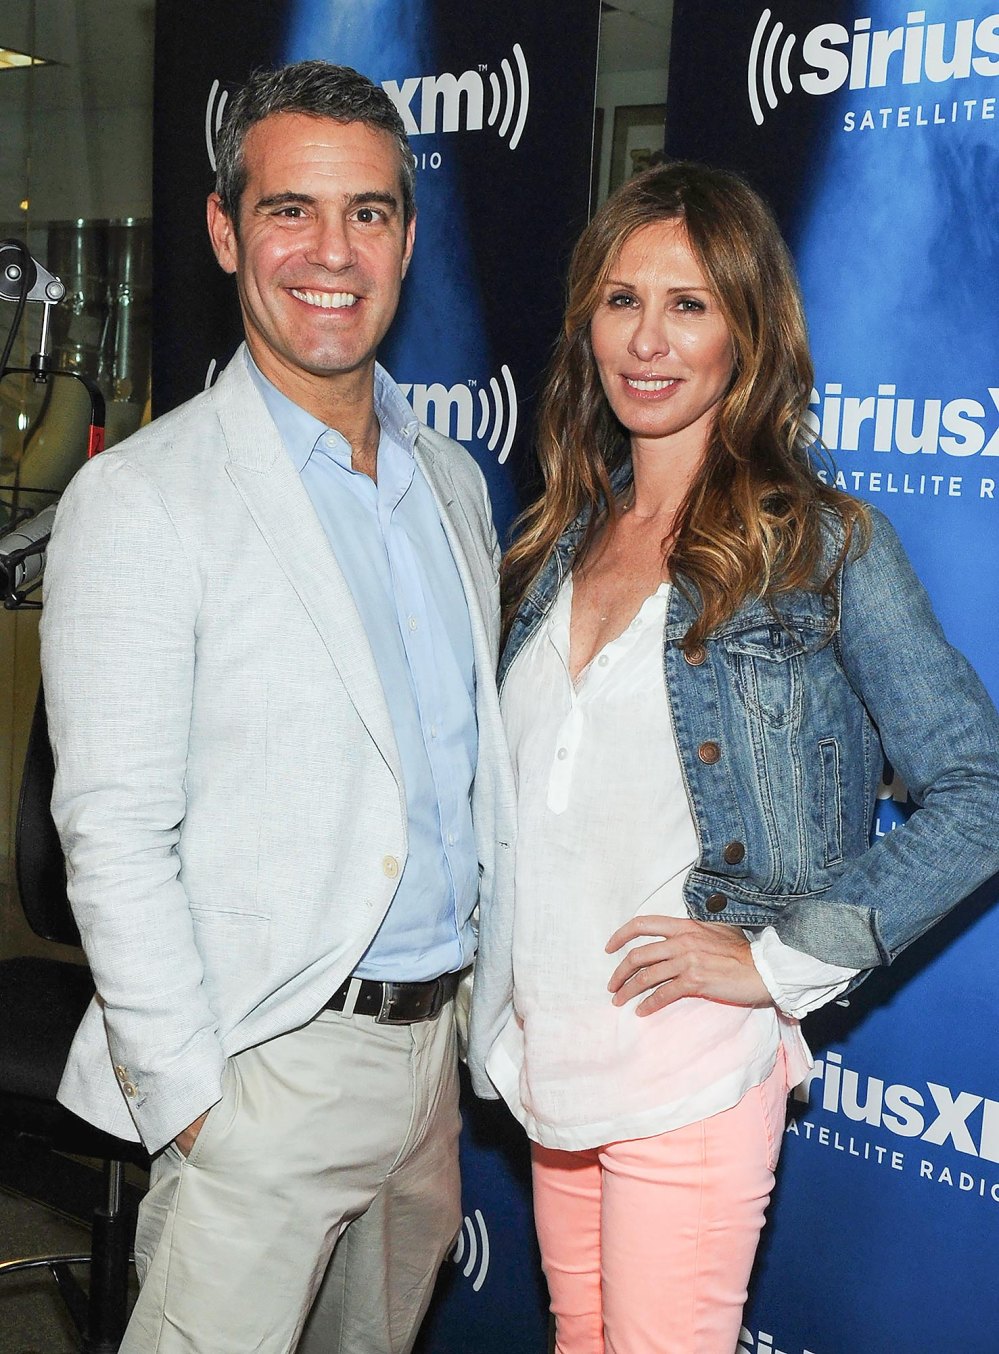 Inside Andy Cohen and Carole Radziwill’s Complicated History On and Off Camera